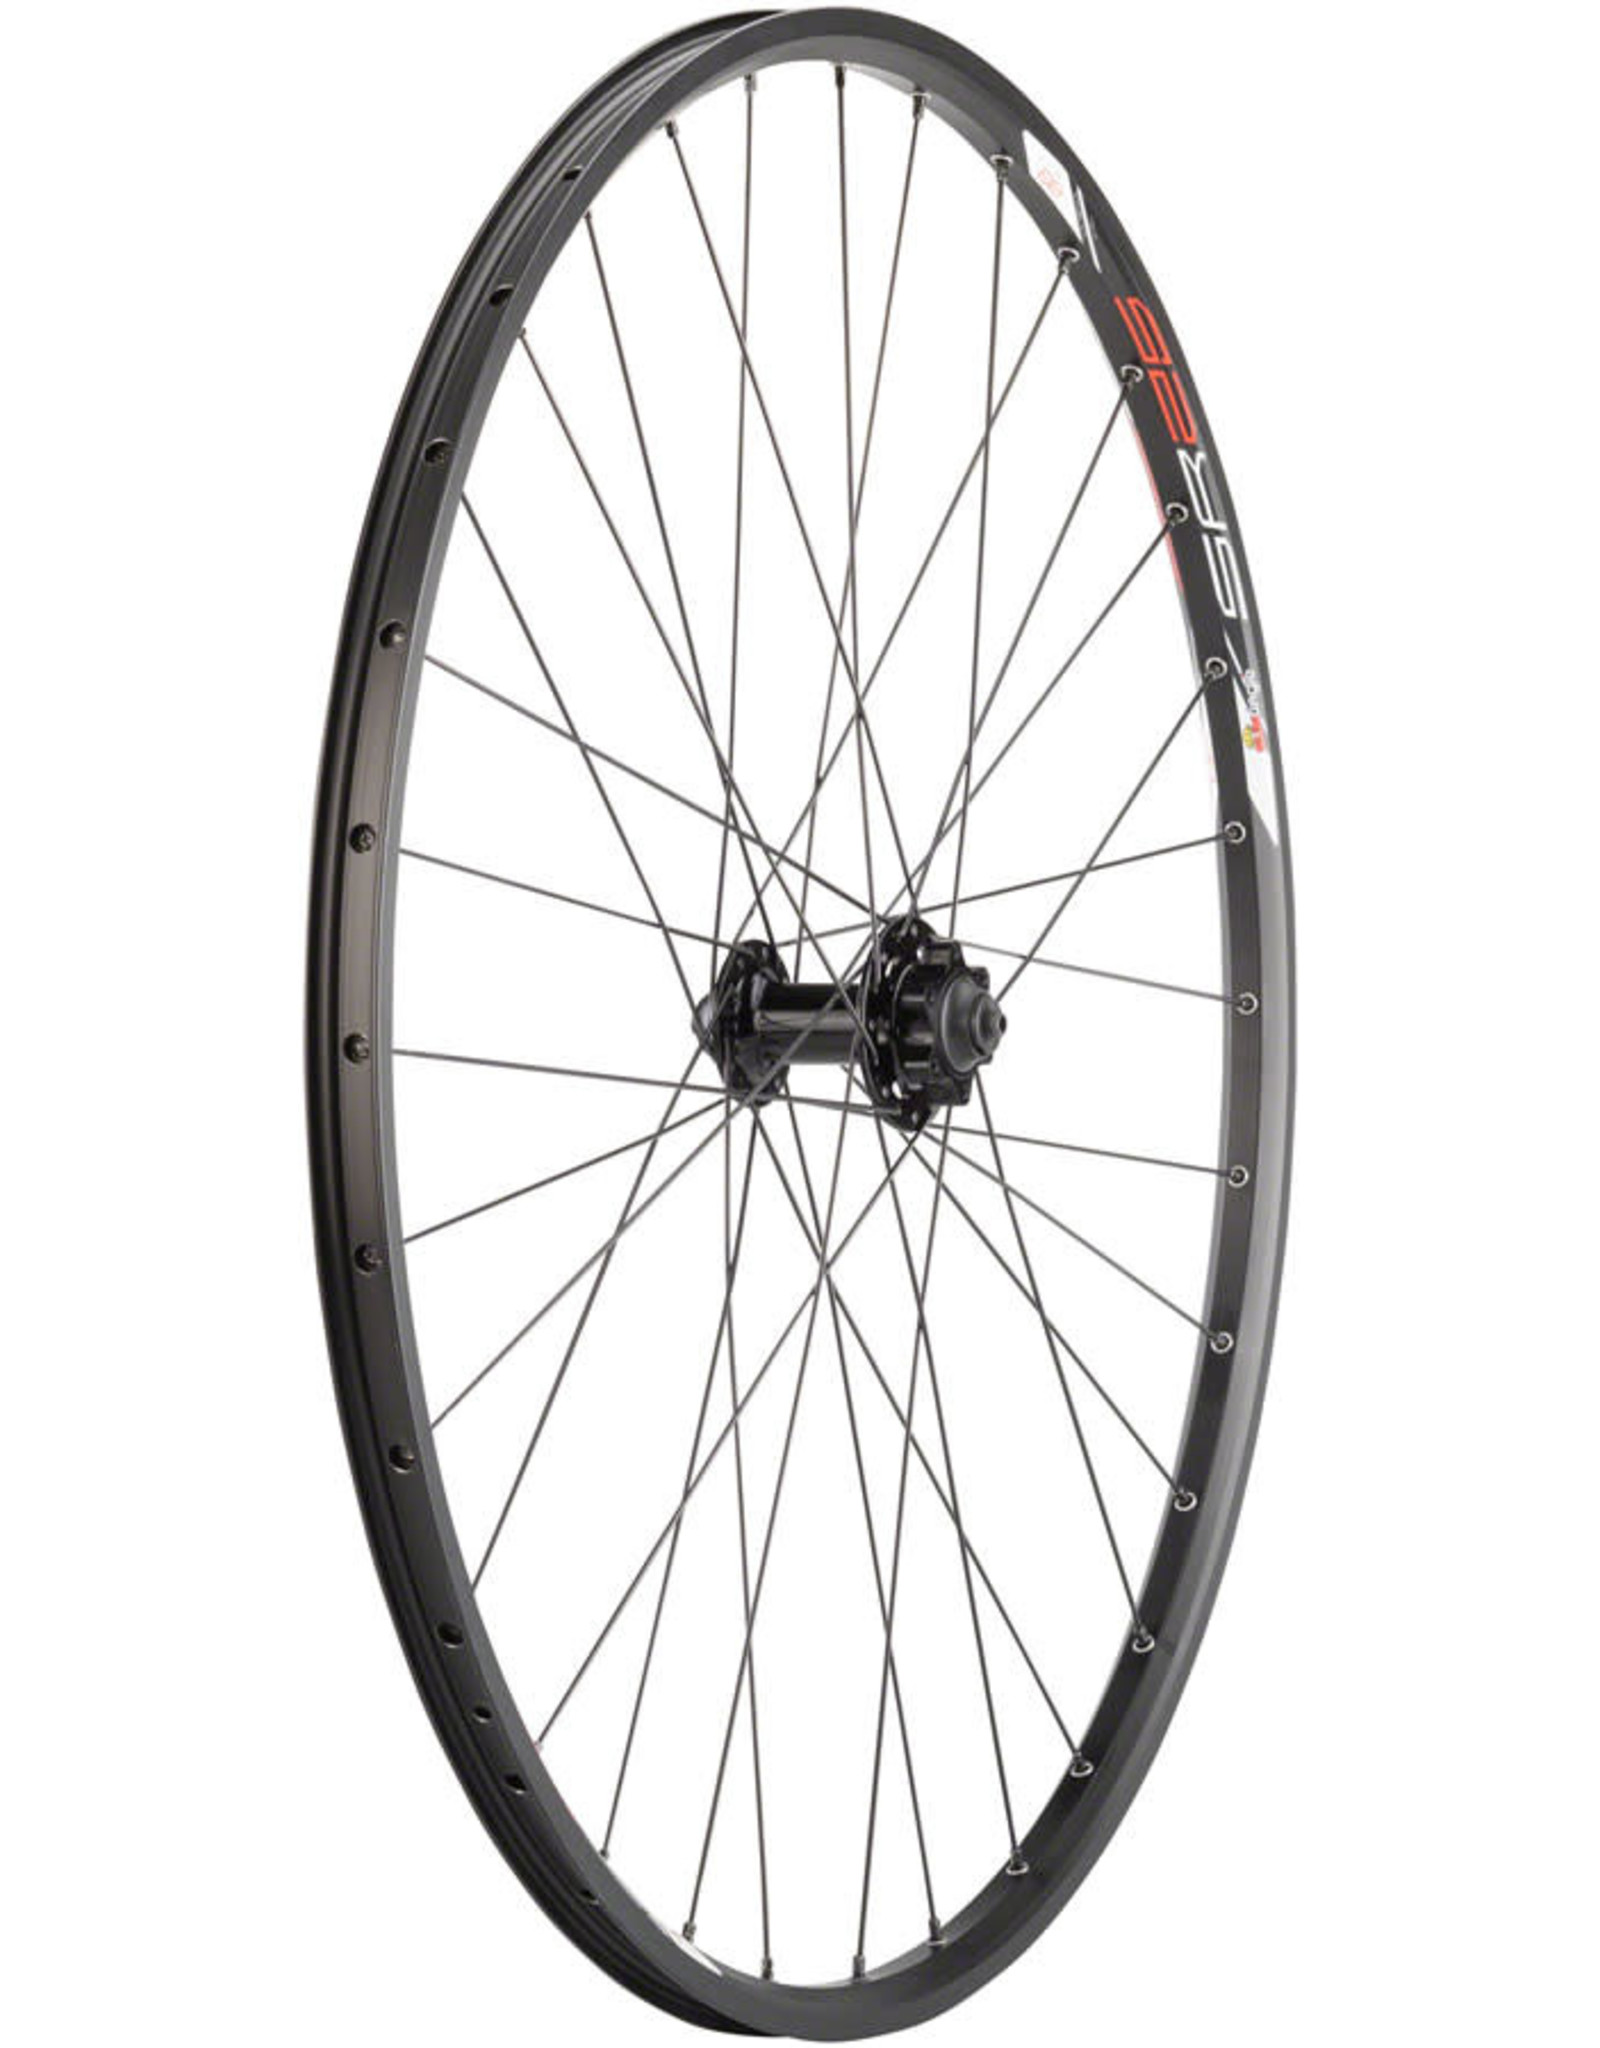 Quality Wheels Quality Wheels Value Double Wall Series Disc Front Wheel - 29", QR x 100mm, 6-Bolt, Black, Clincher